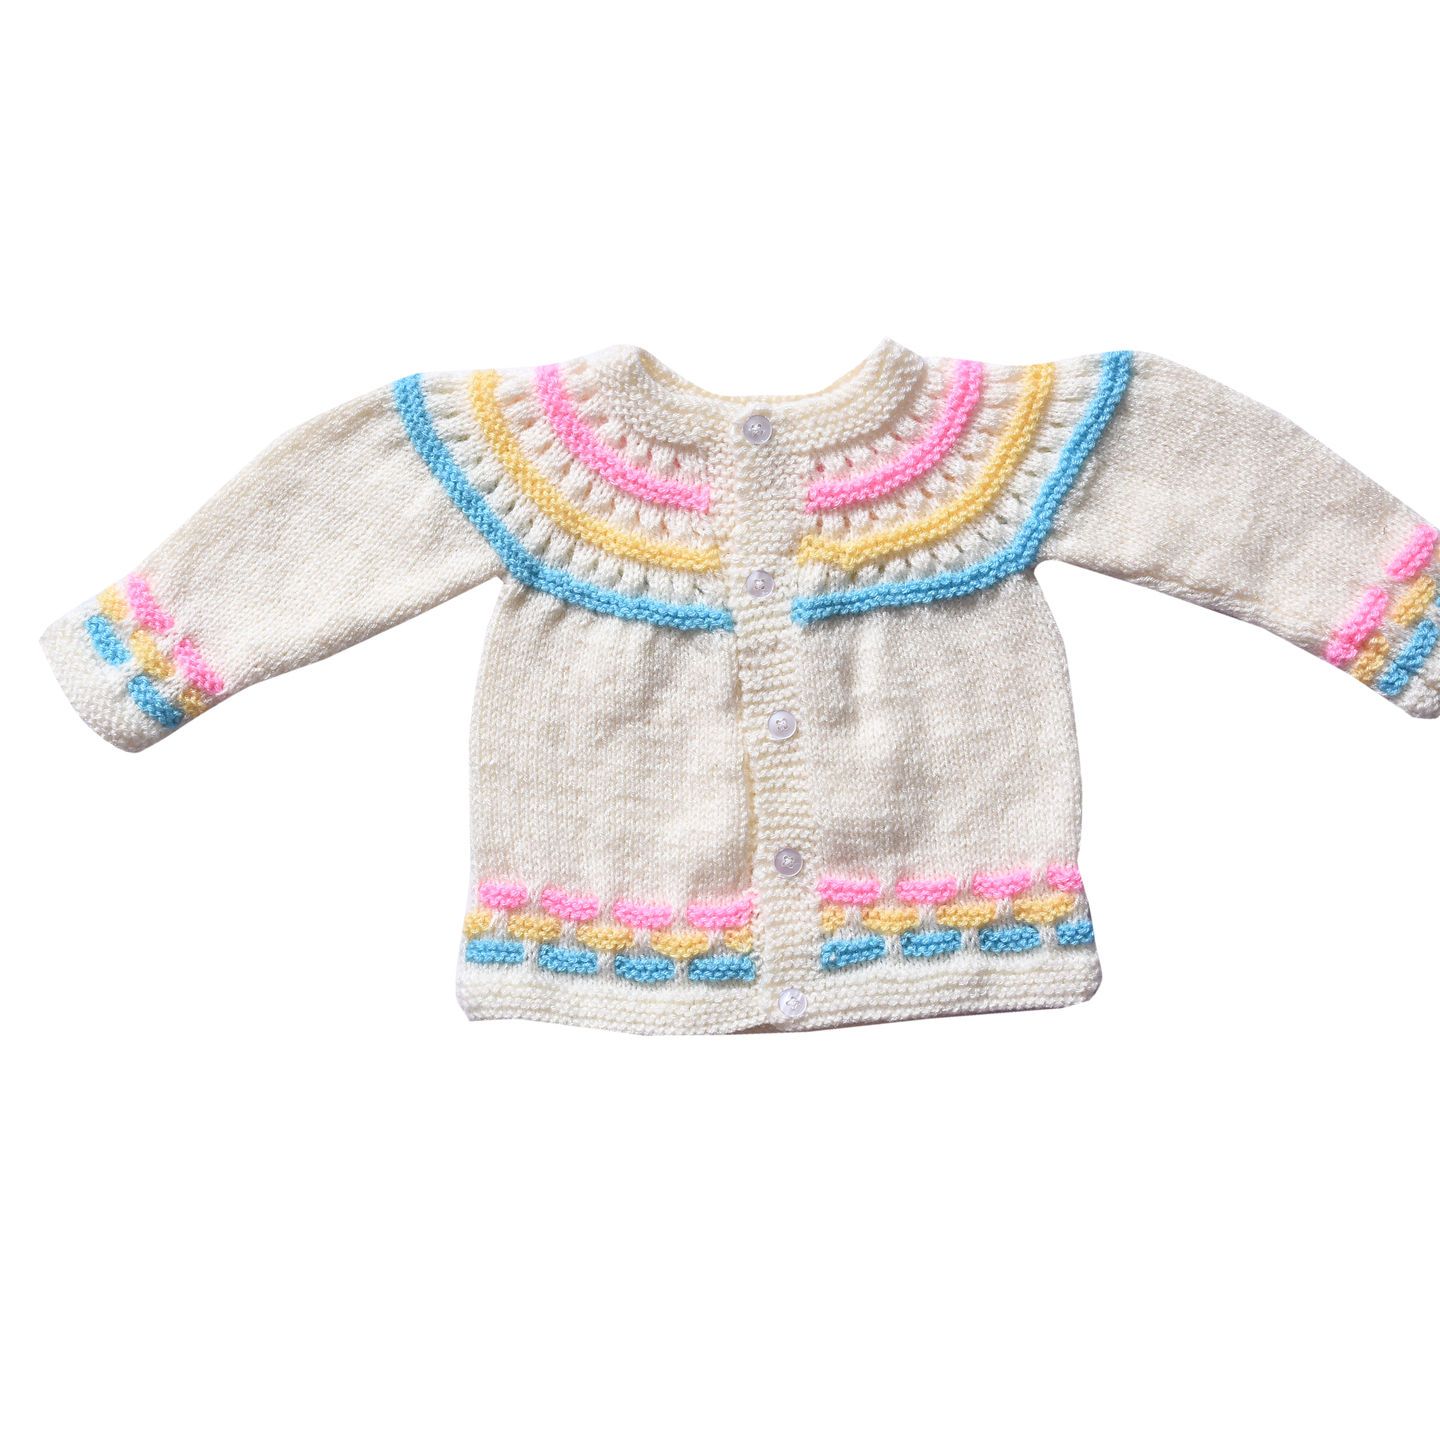 Handwoven Full Sleeves Sweaters for Newborn 0-3 Months